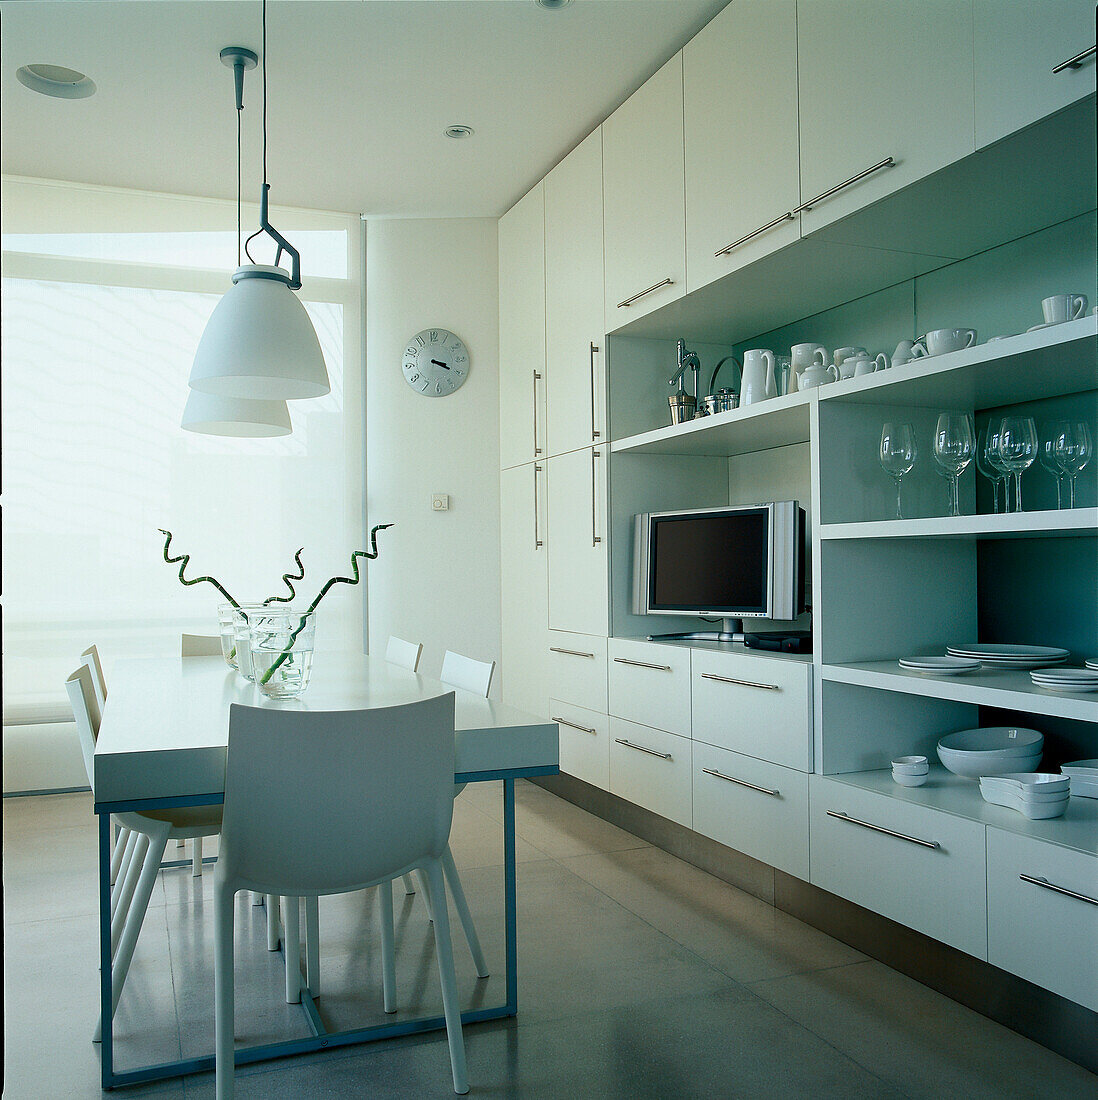 Contemporary white kitchen diner with large wall storage unit for tableware and home wares